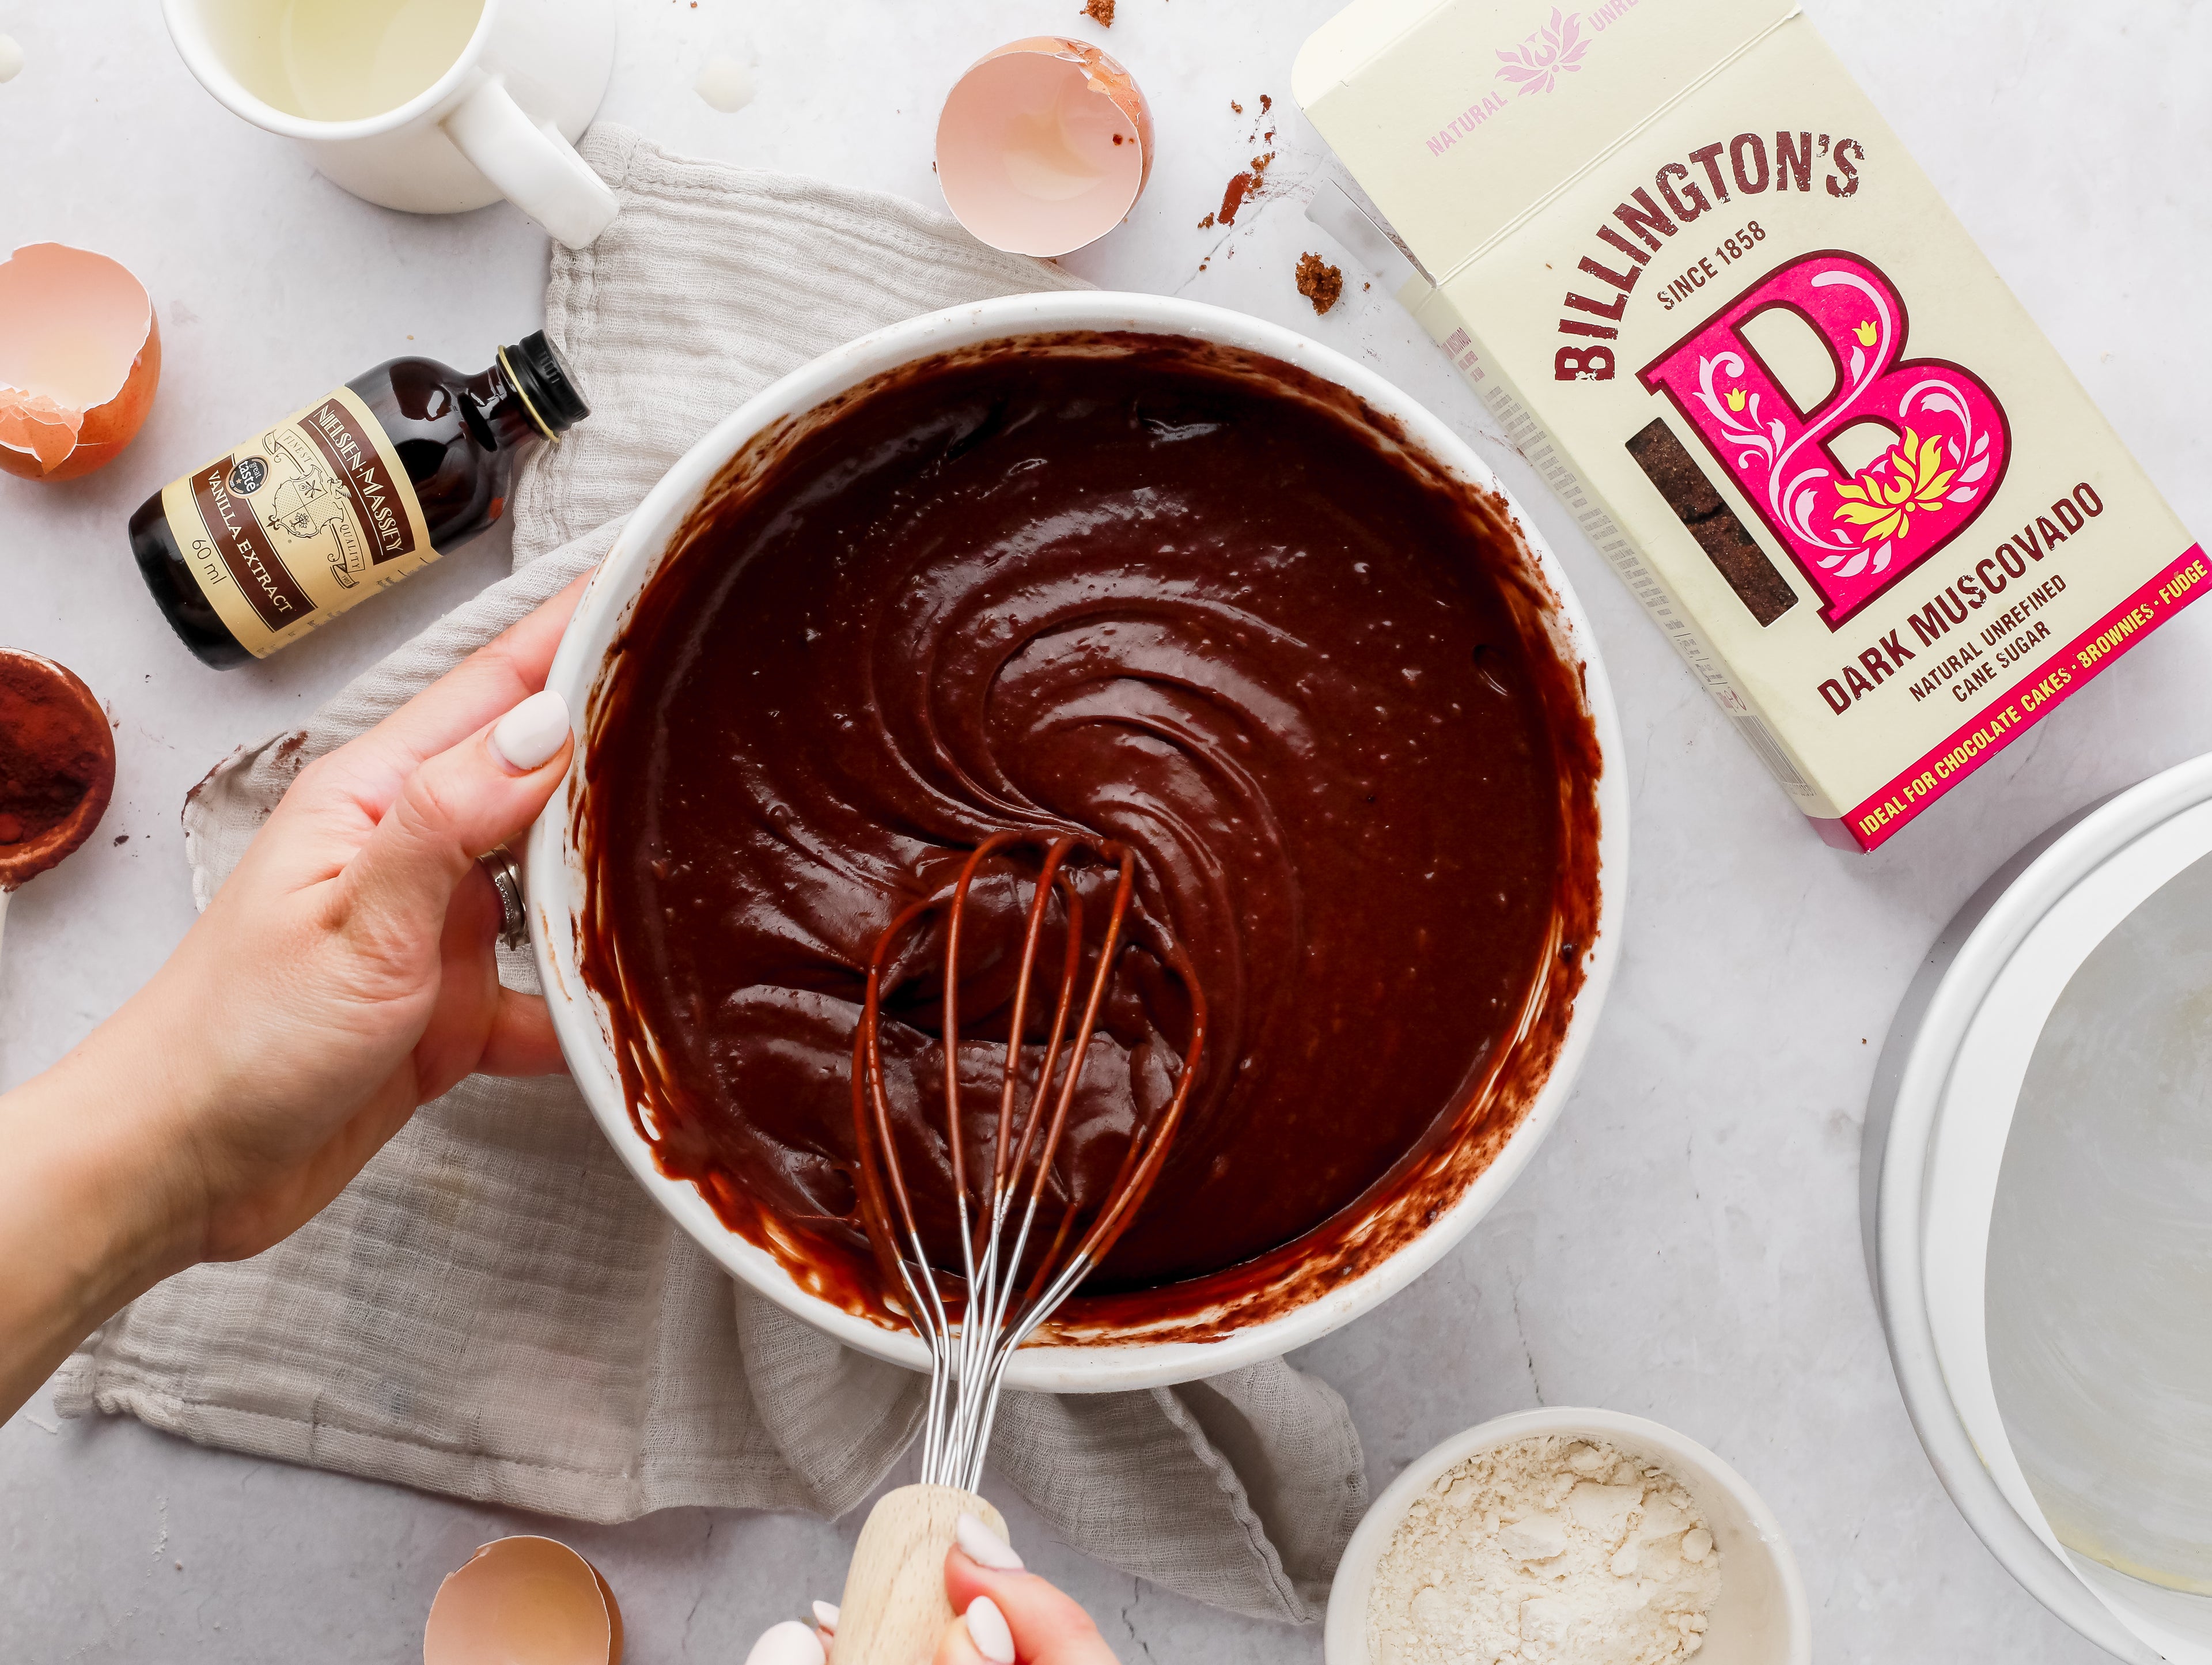 Chocolate cake mix being whisked in a bowl surrounded by baking ingredients